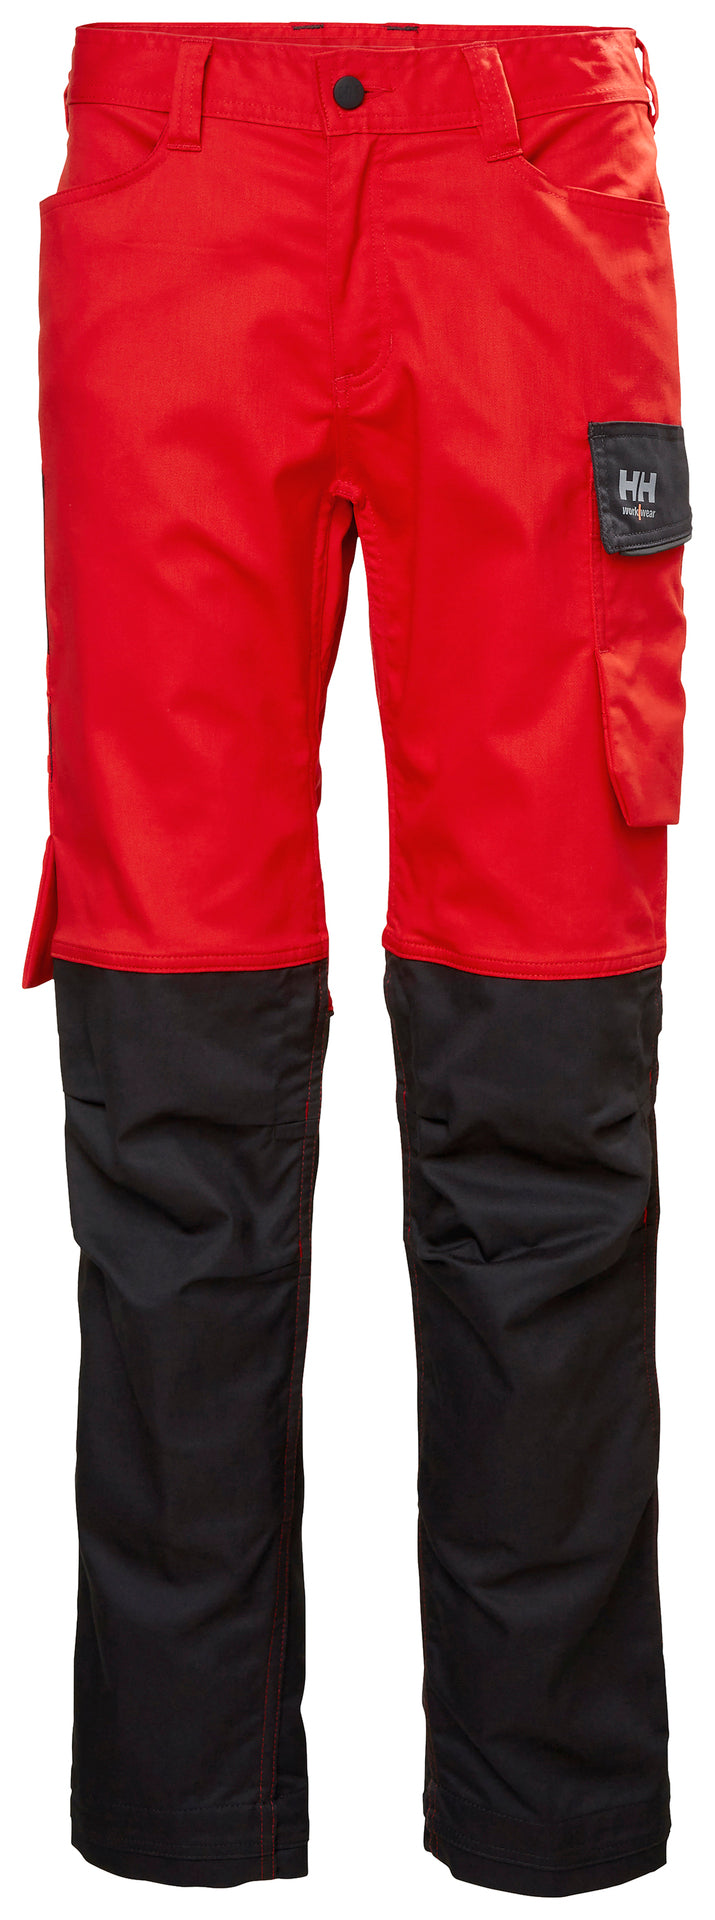 Helly Hansen Womens Manchester Work Trousers - REd/Ebony